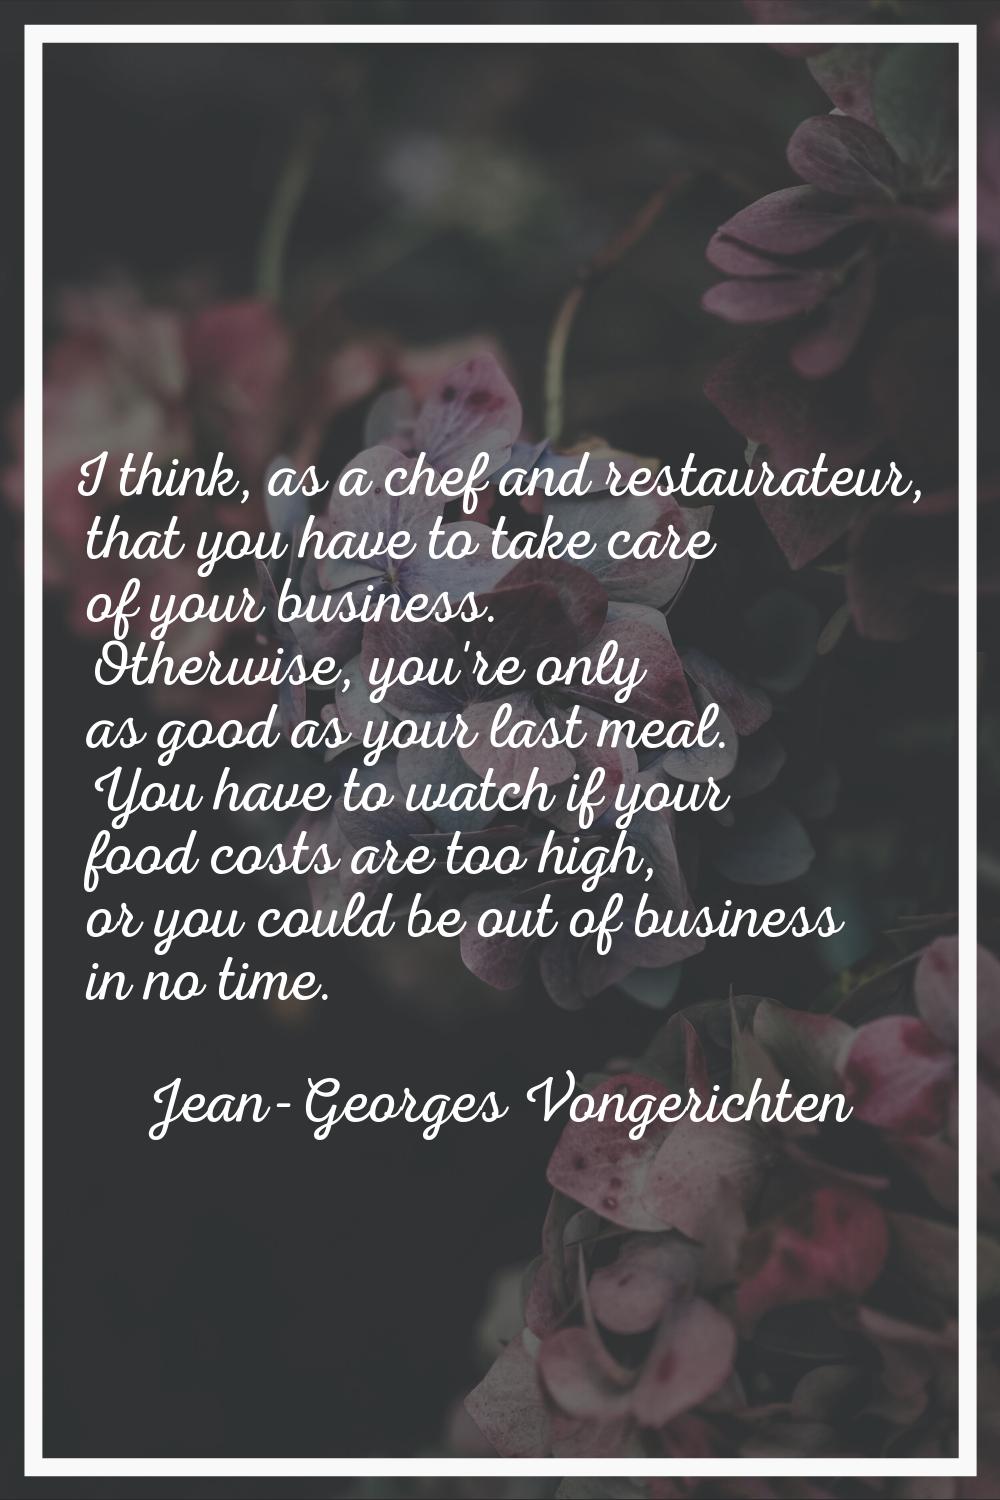 I think, as a chef and restaurateur, that you have to take care of your business. Otherwise, you're